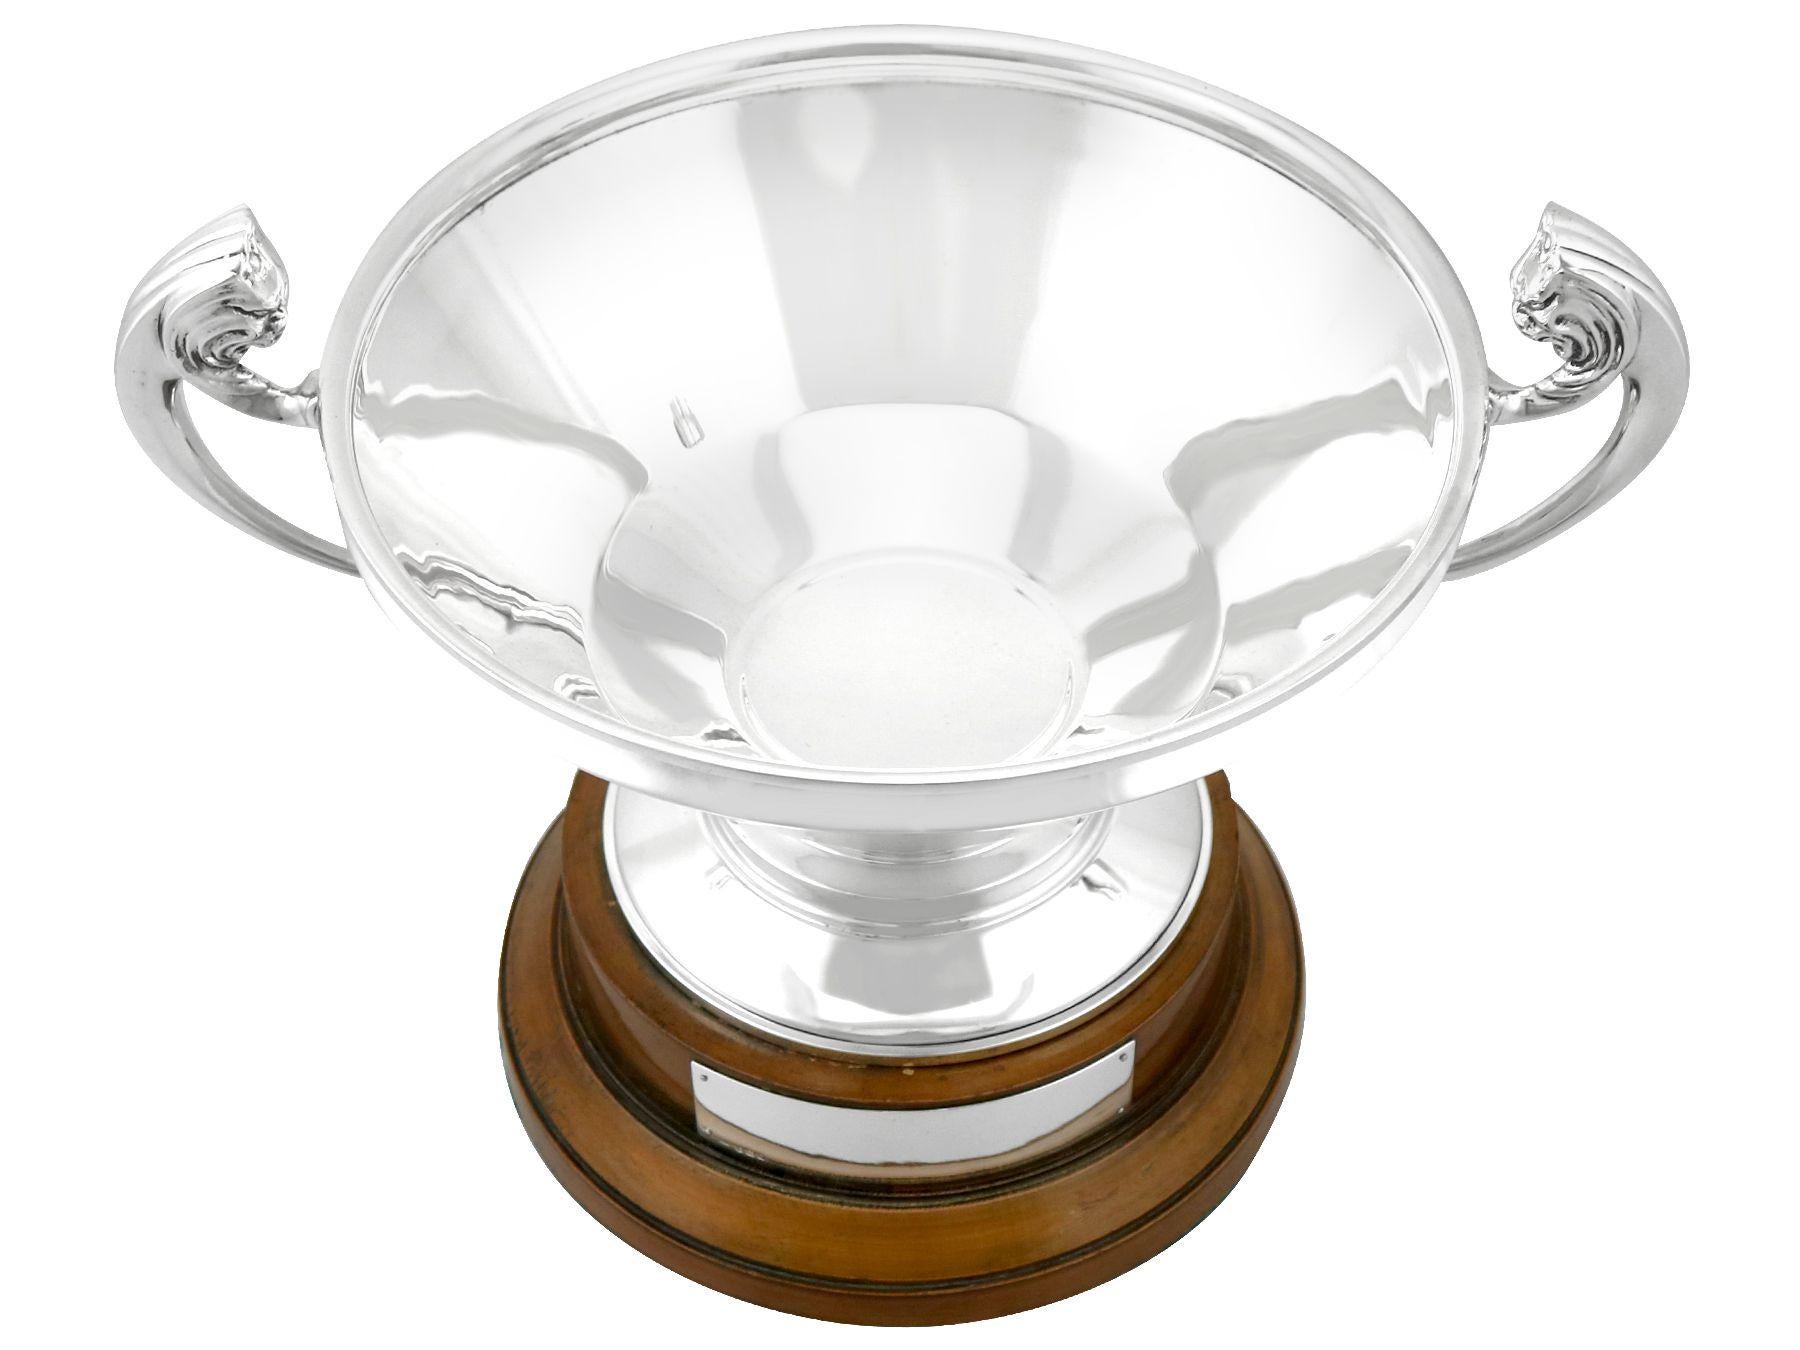 An exceptional, fine and impressive antique English sterling silver Art Deco presentation bowl and plinth; an addition to our ornamental silverware collection.

This exceptional, fine and impressive presentation antique silver bowl has a circular